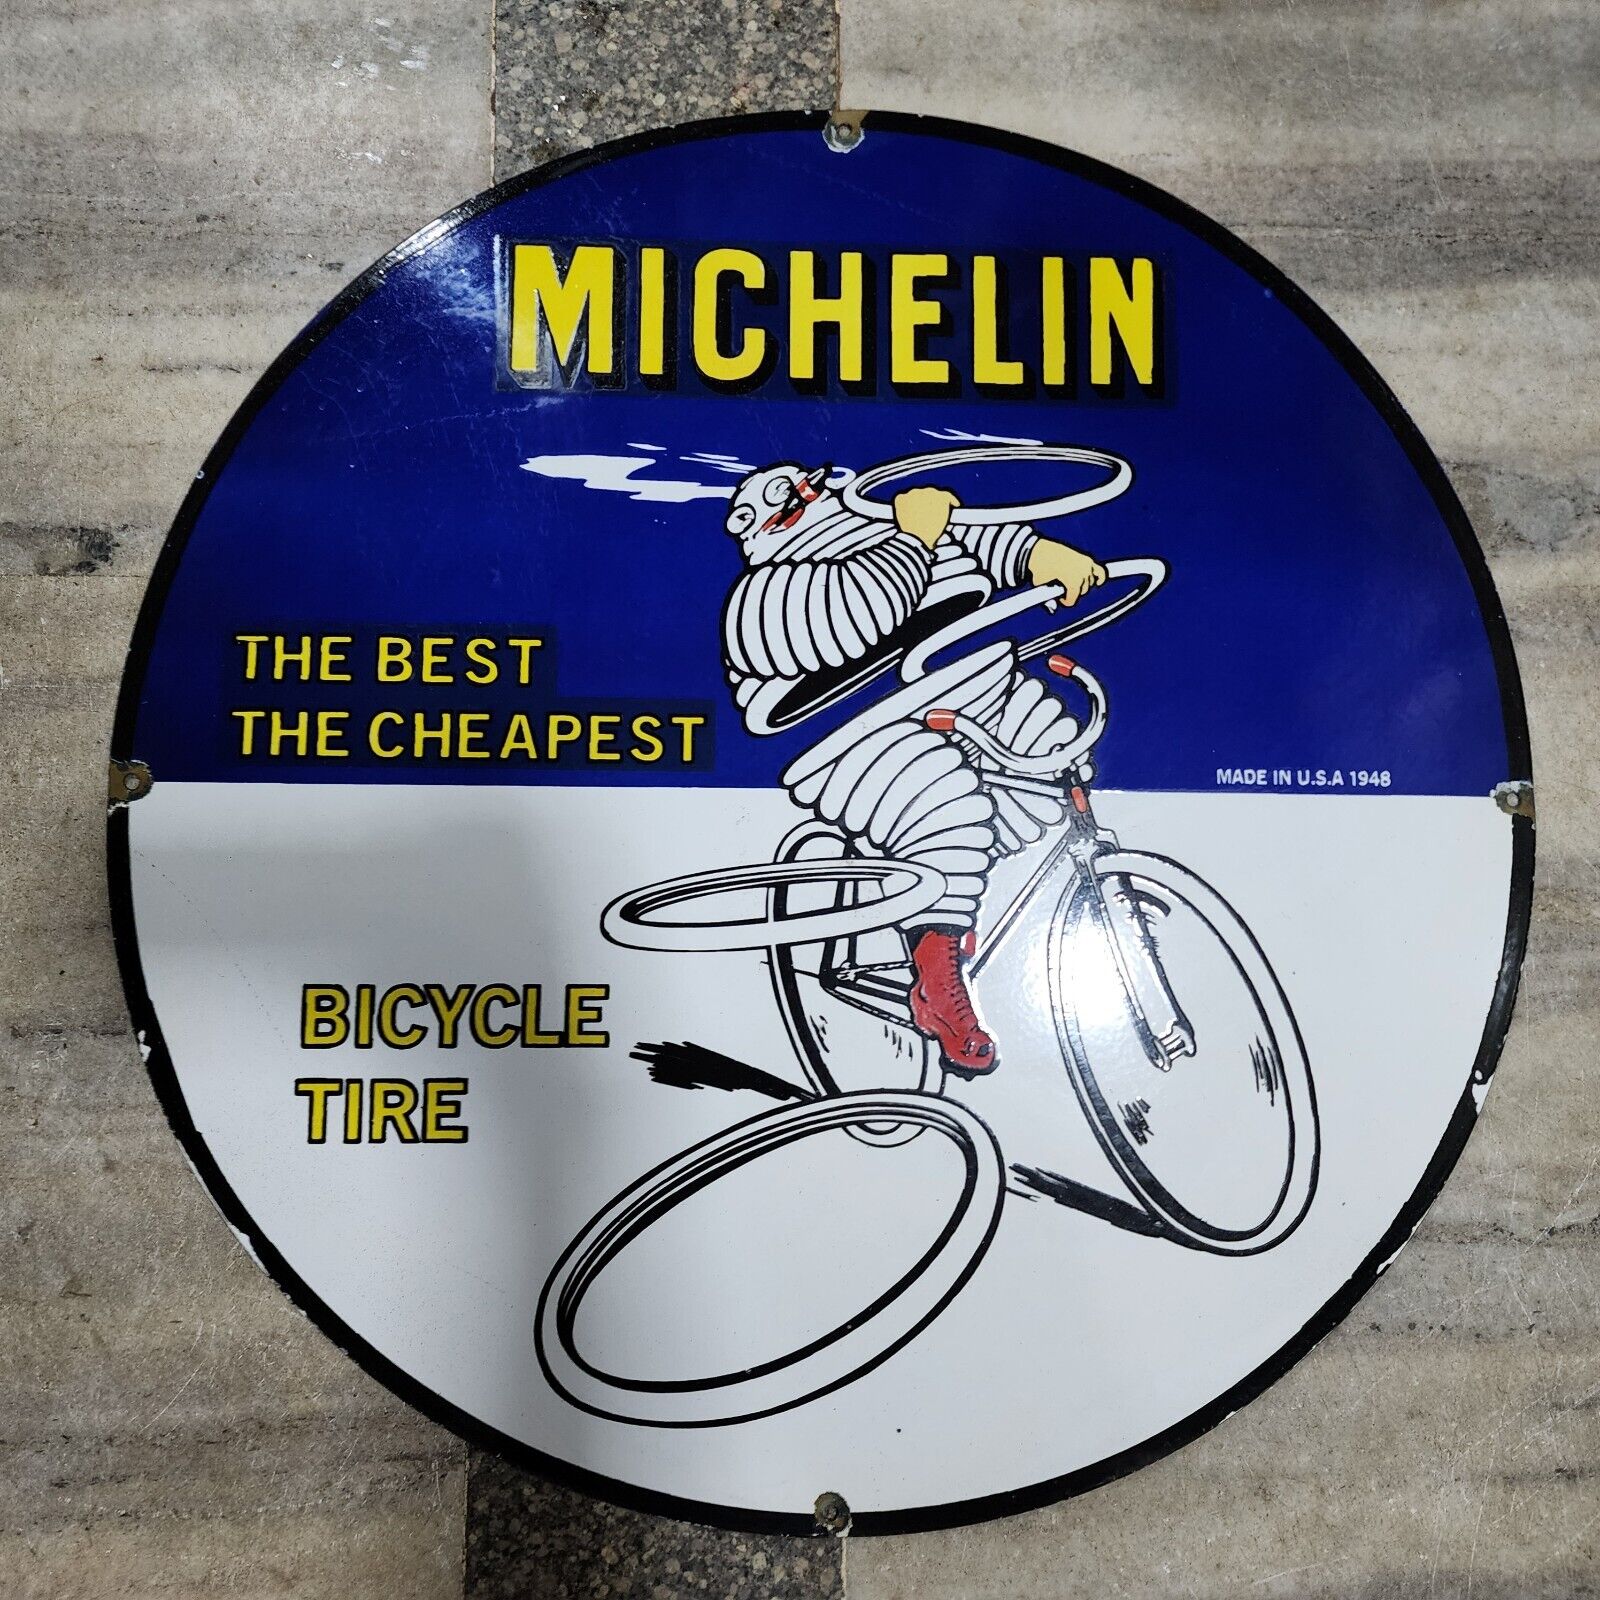 MICHELIN PORCELAIN ENAMEL SIGN 30 INCHES ROUND